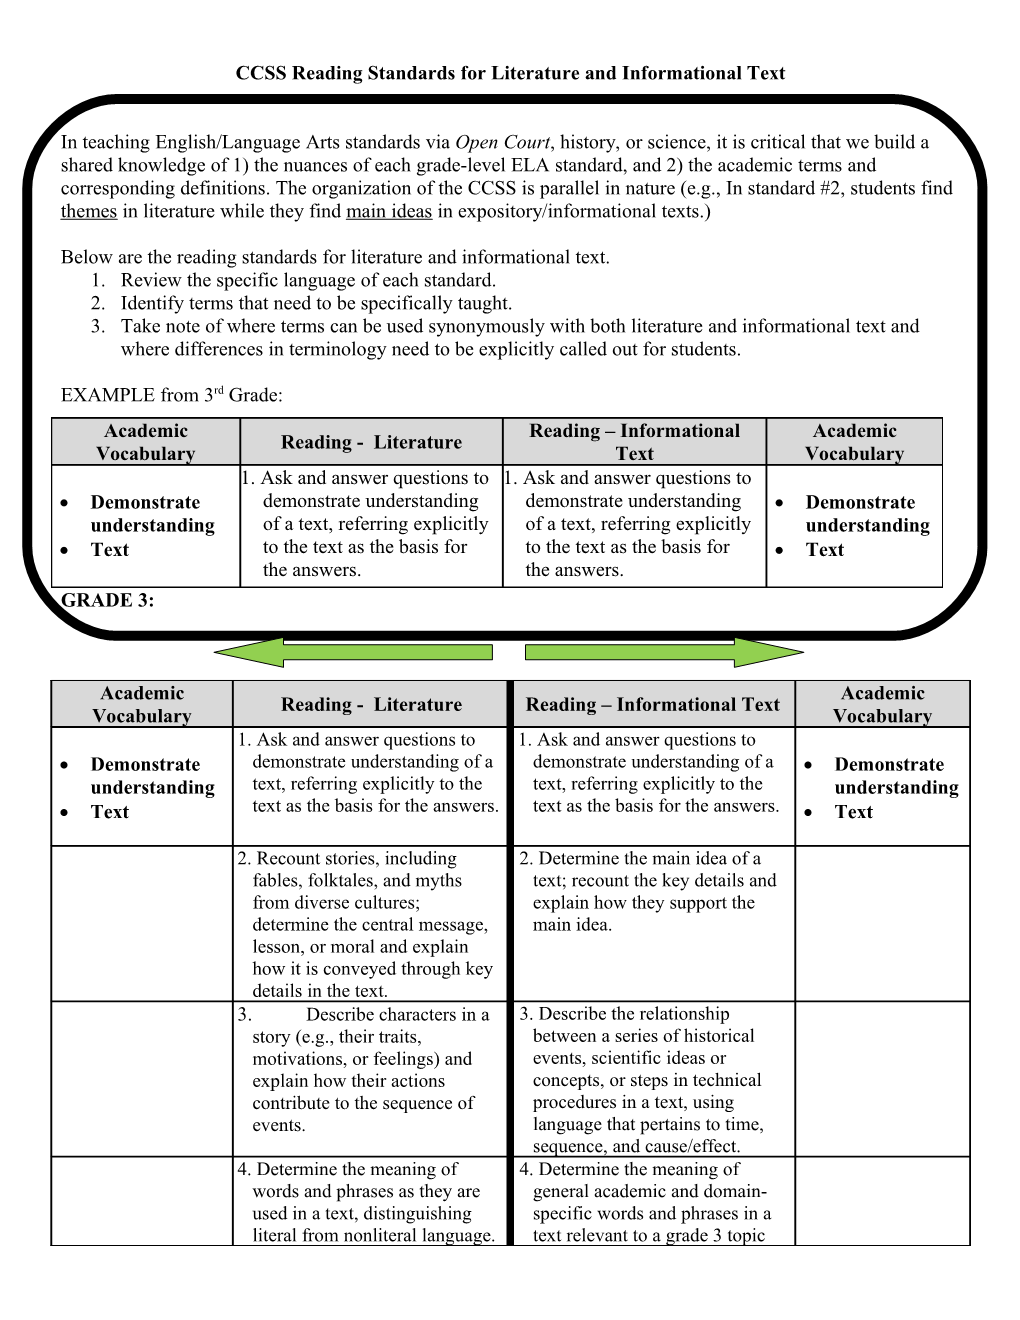 CCSS Reading Standards for Literature and Informational Text